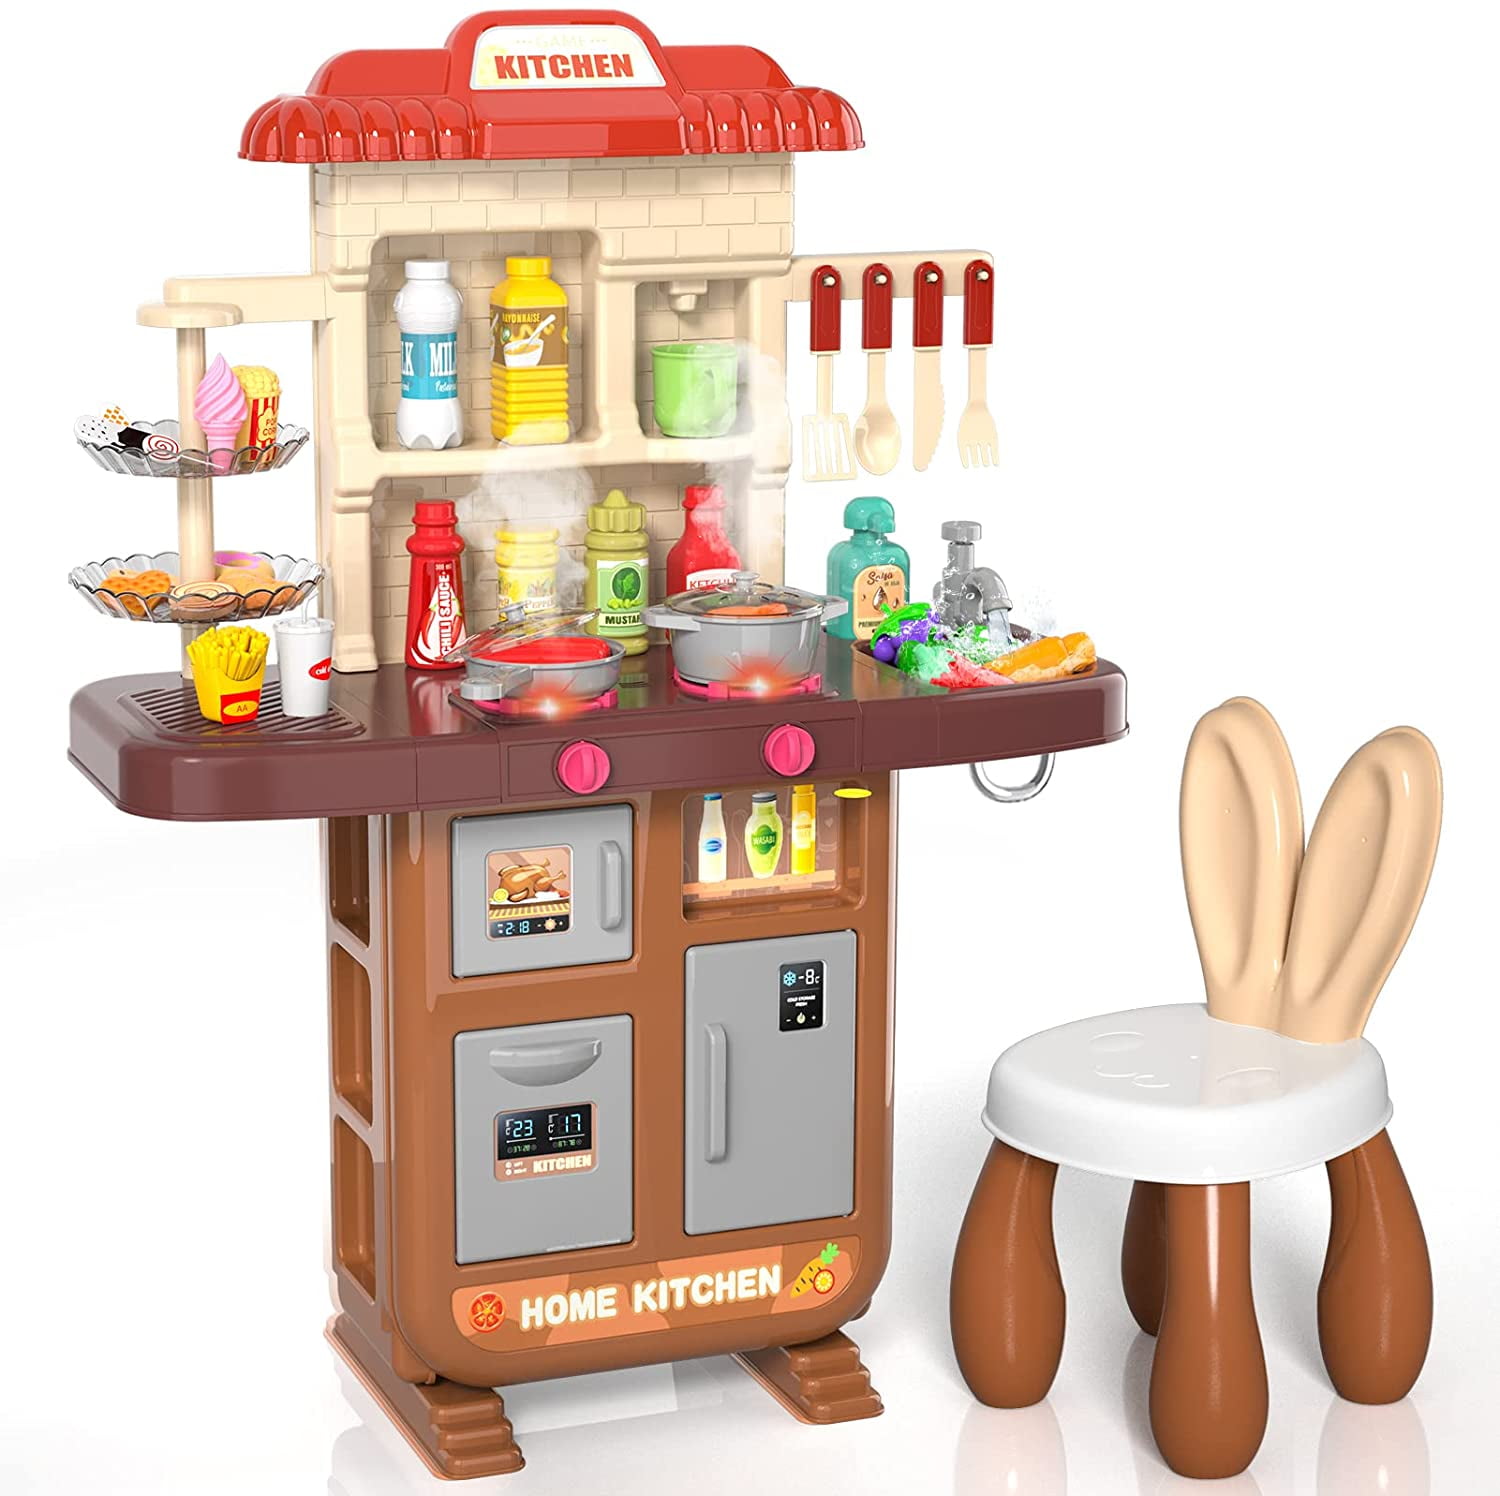 Kitchen Pretend Play Toys For Kids Role Play 42PCS Cooking Set Playset Xmas Gift 